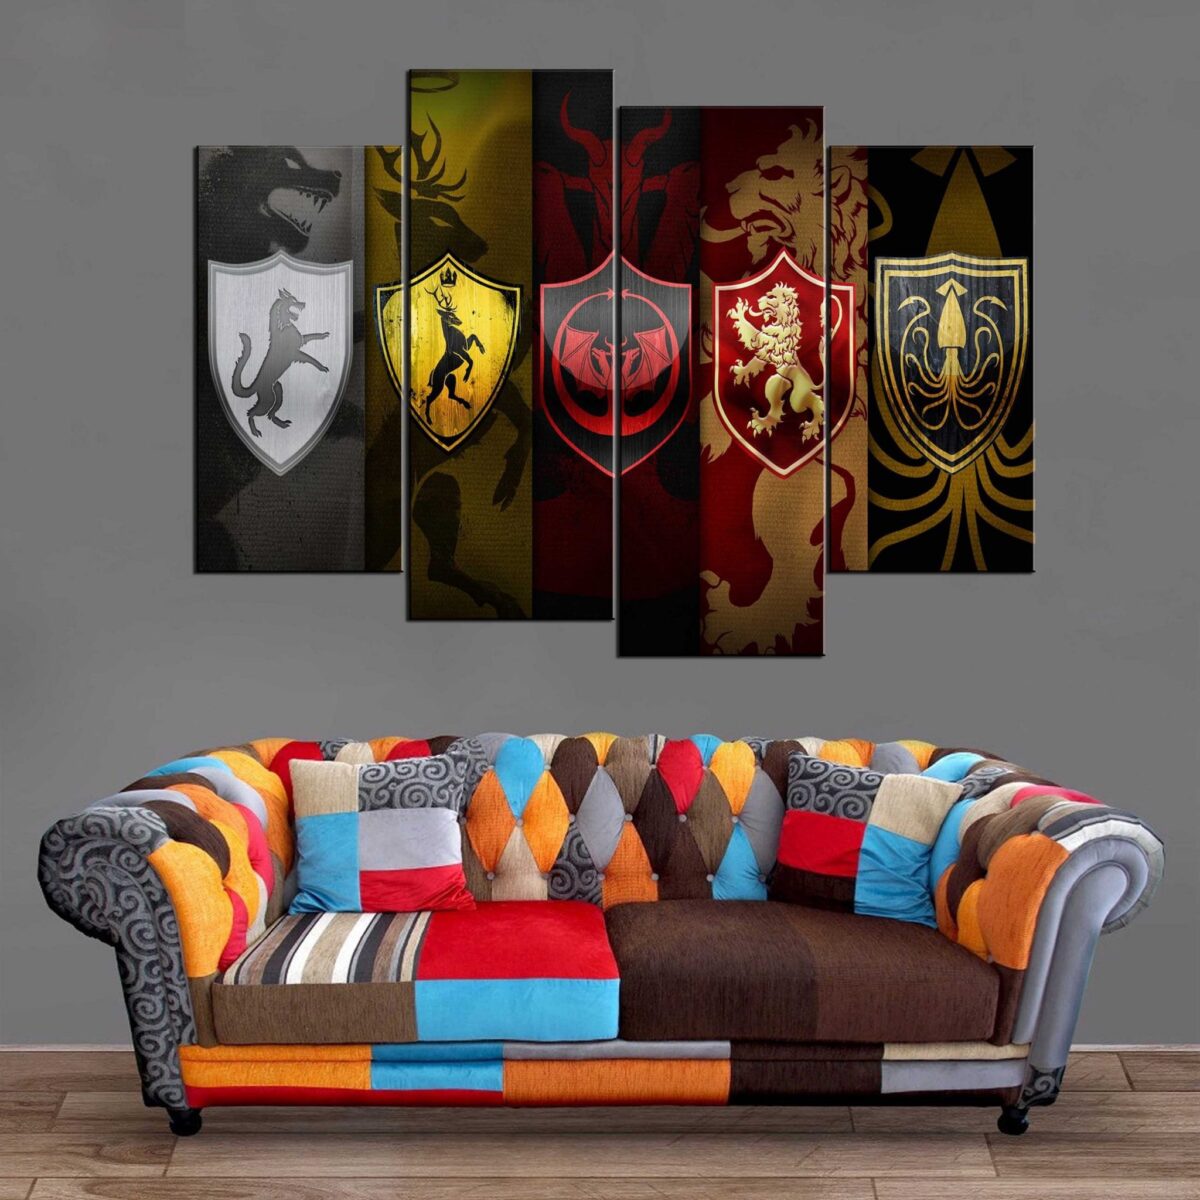 Décoration Murale Games Of Thrones Maisons